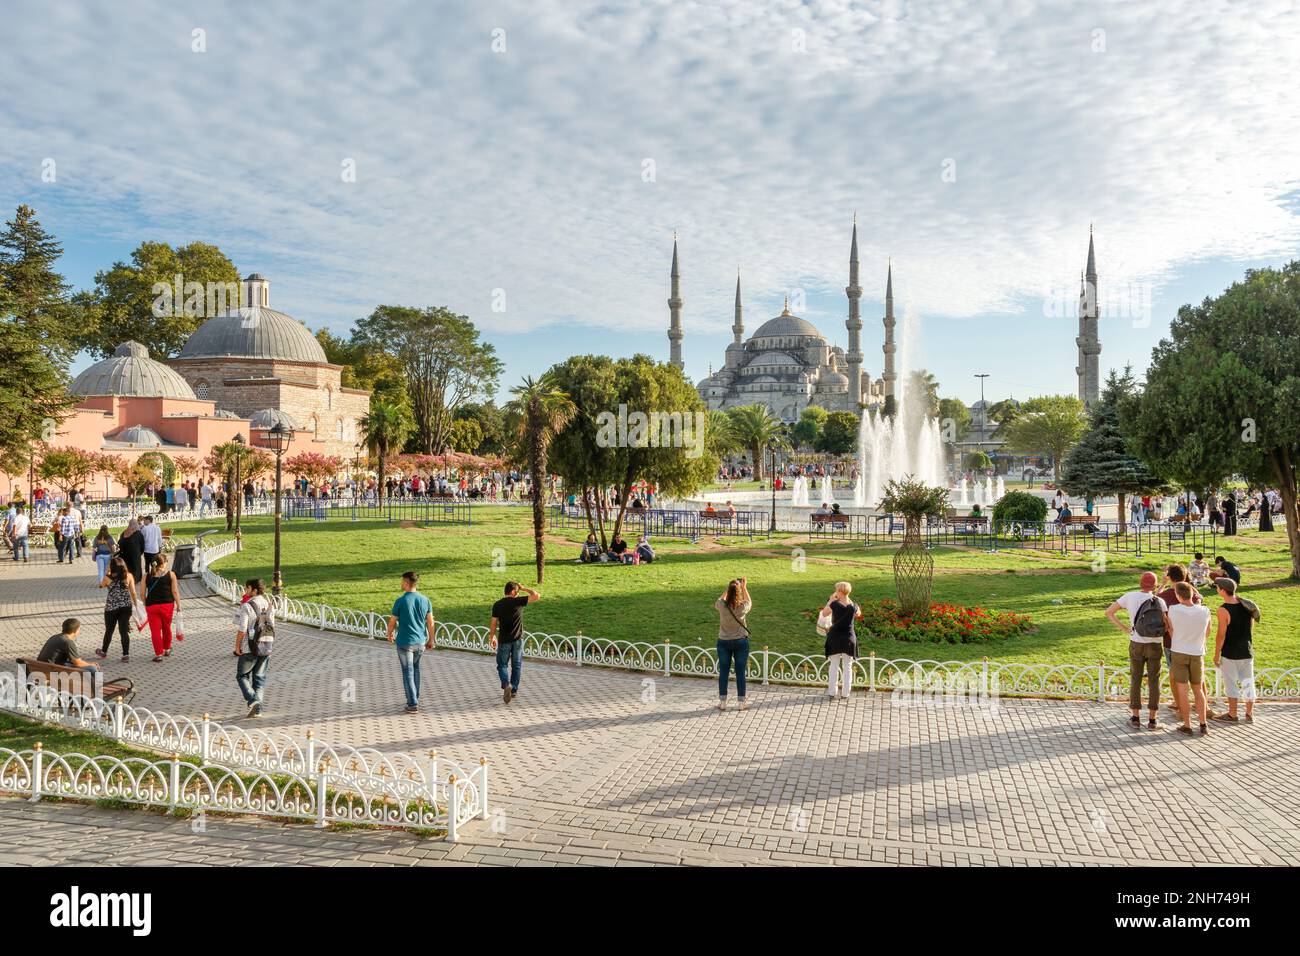 People walking and enjoying park at Sultanahmet Square; (The Old Hippodrome Of Constantinople), famous tourist attraction and landmark of  Istanbul. Stock Photo